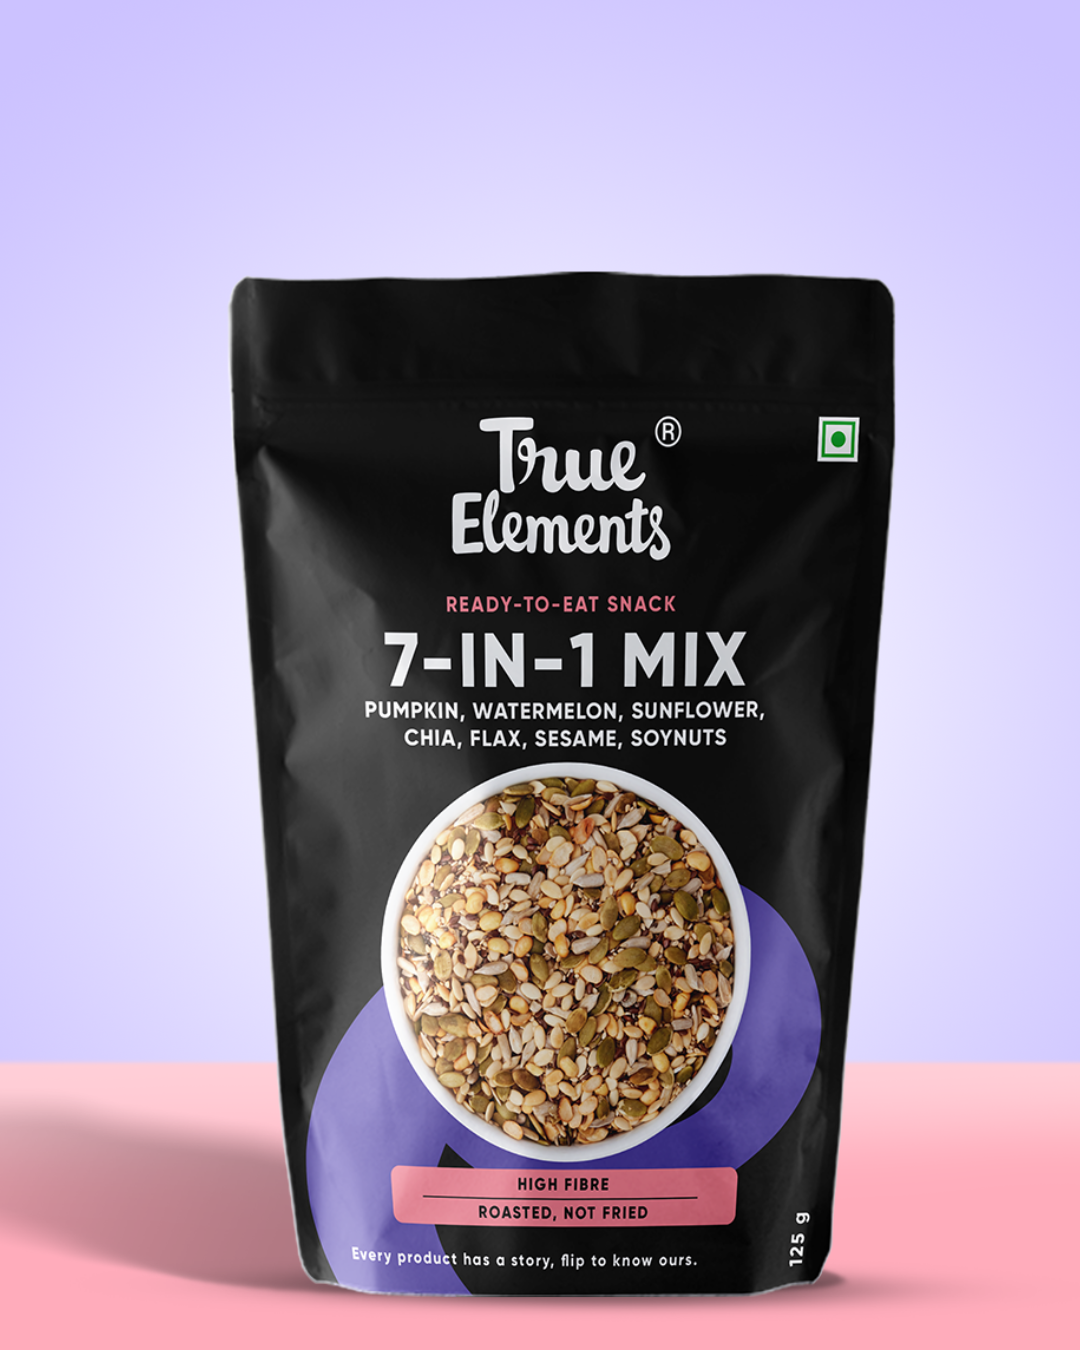 7 in 1 mix with pumpkin, watermelon, sunflower, chia, flax, sesame, & soynuts in 125g pouch.